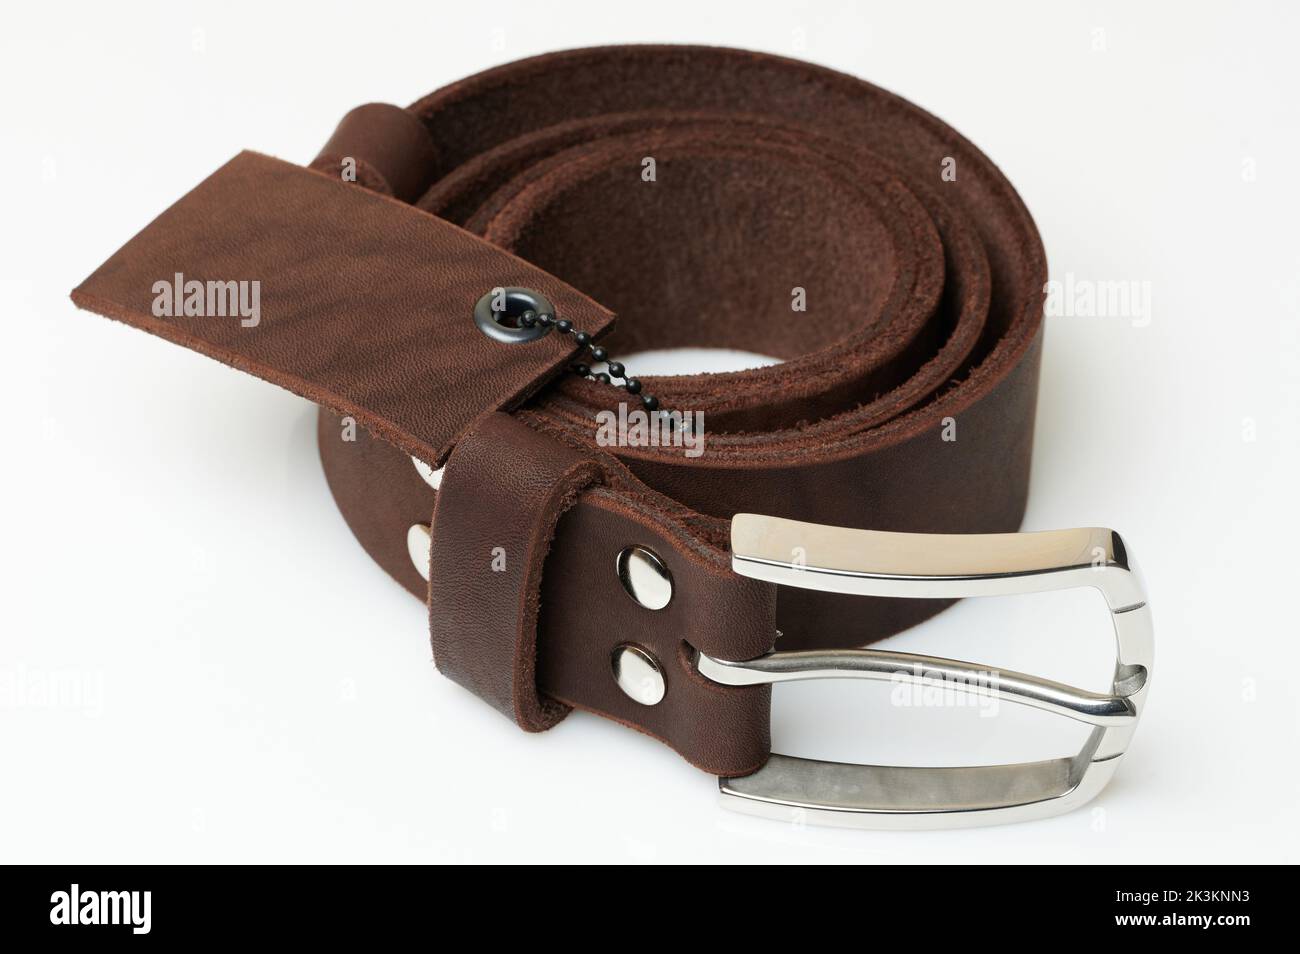 Brown color leather belt with metal buckle close up view isolated Stock Photo